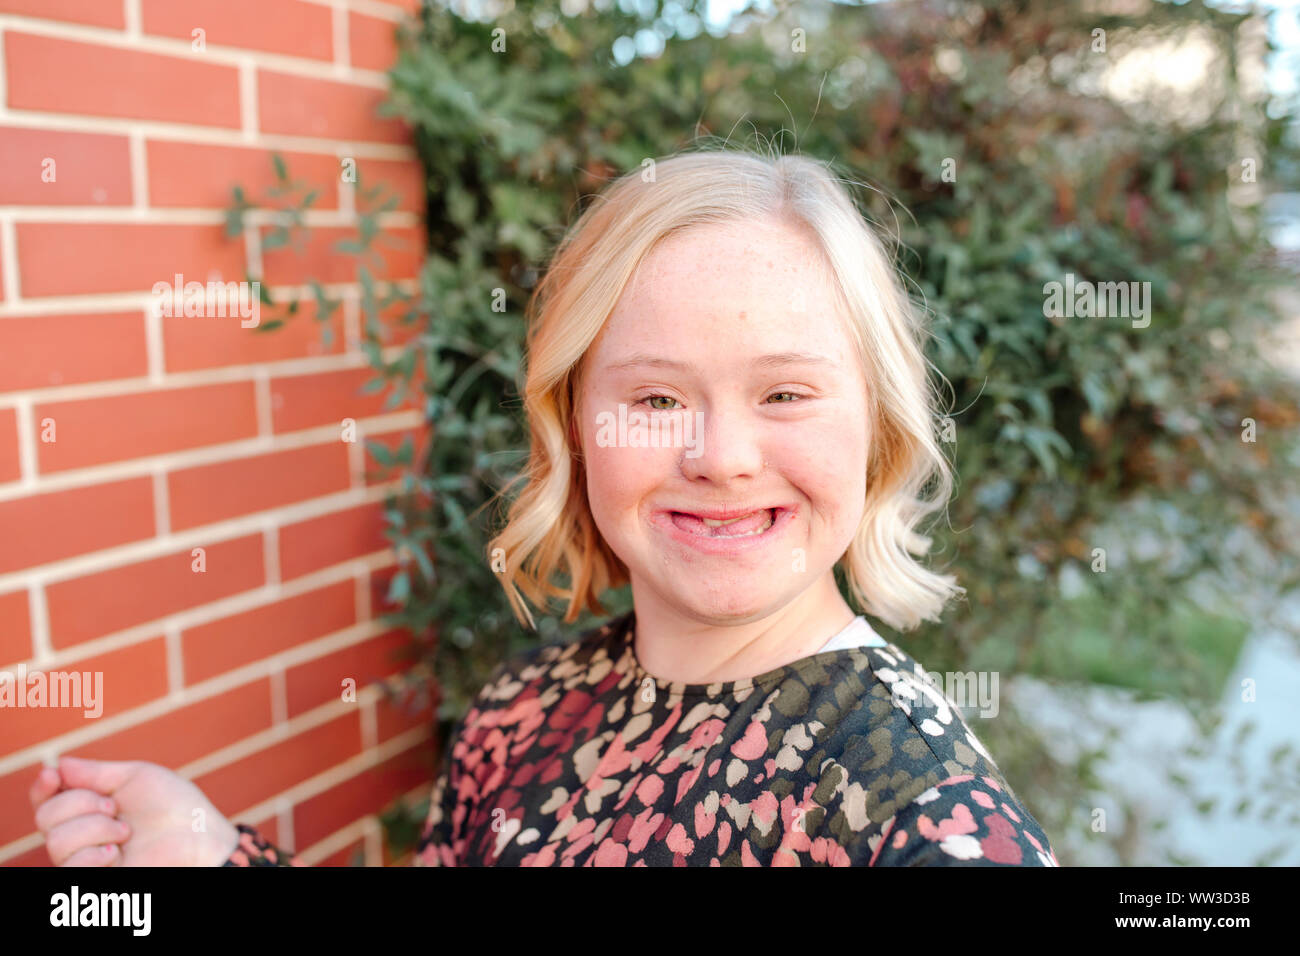 Happy teen girl with Down Syndrome smiling by brick wall on sunny day Stock Photo